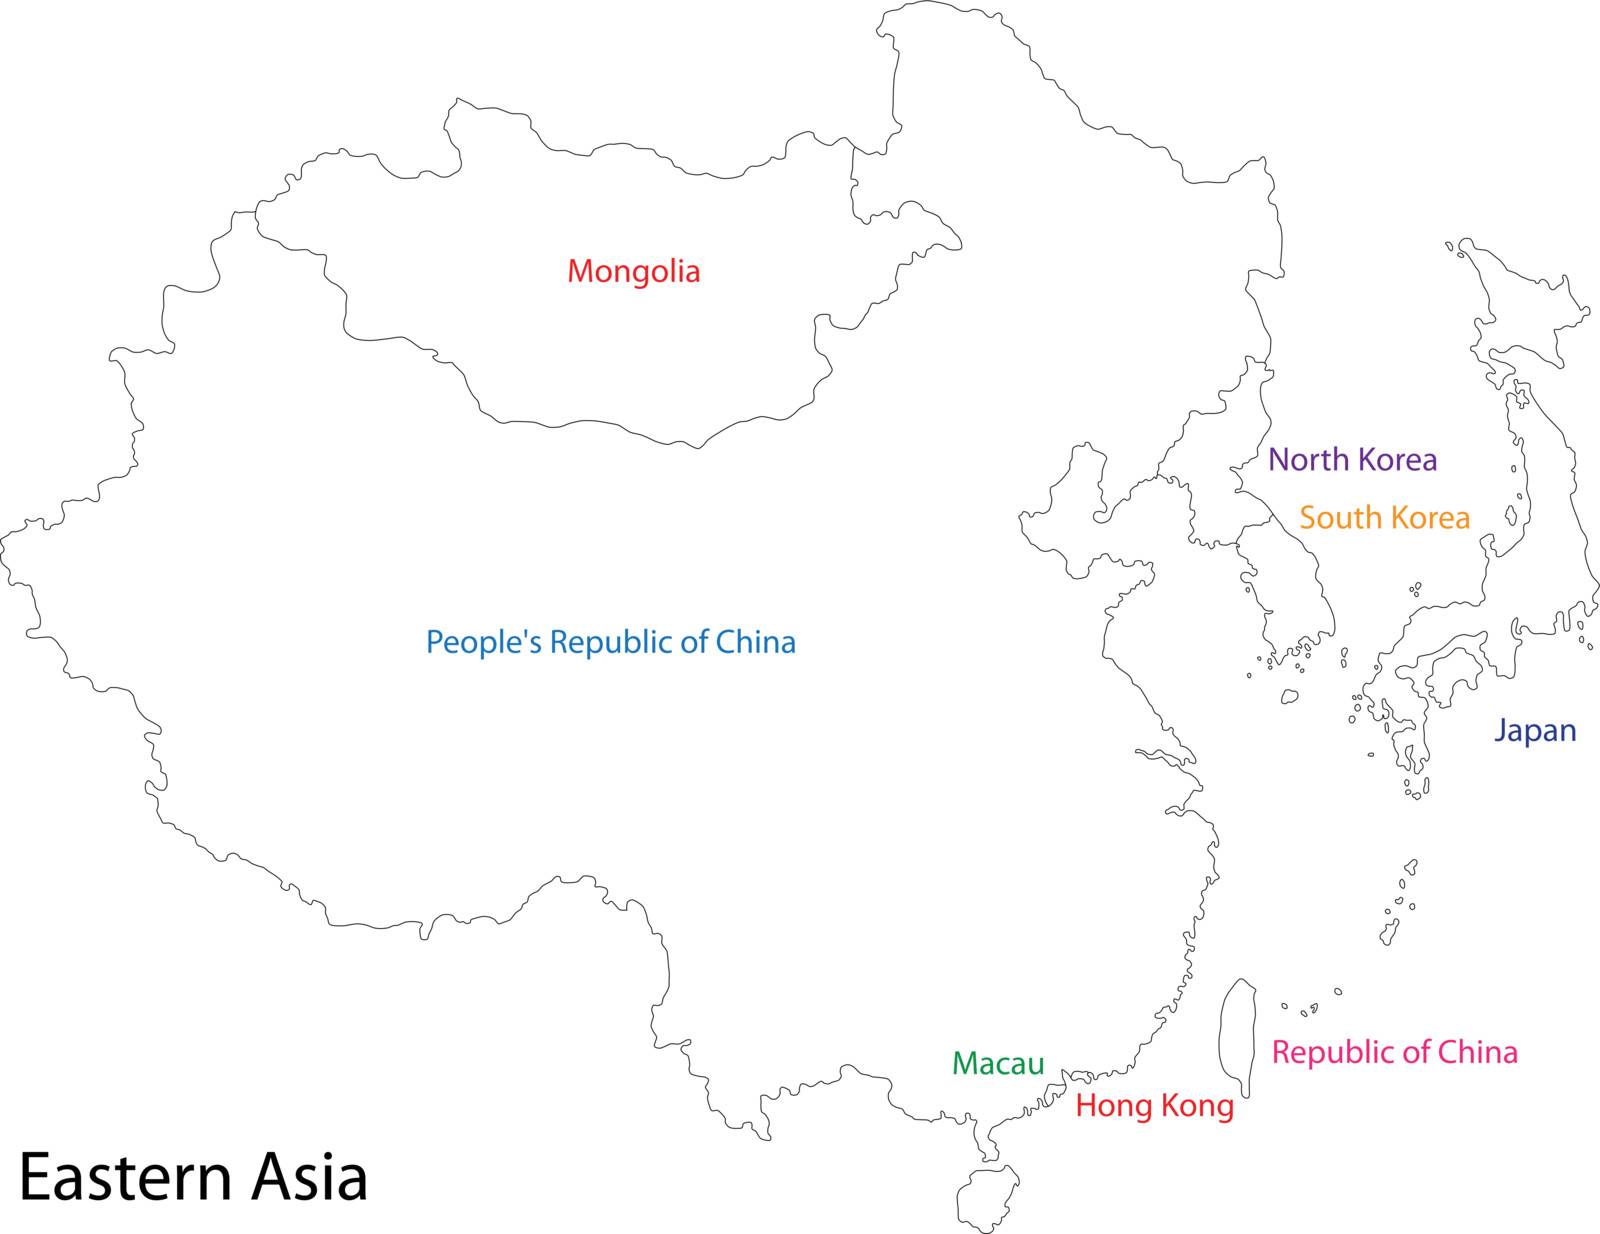 Outline map of Eastern Asia divided by the countries